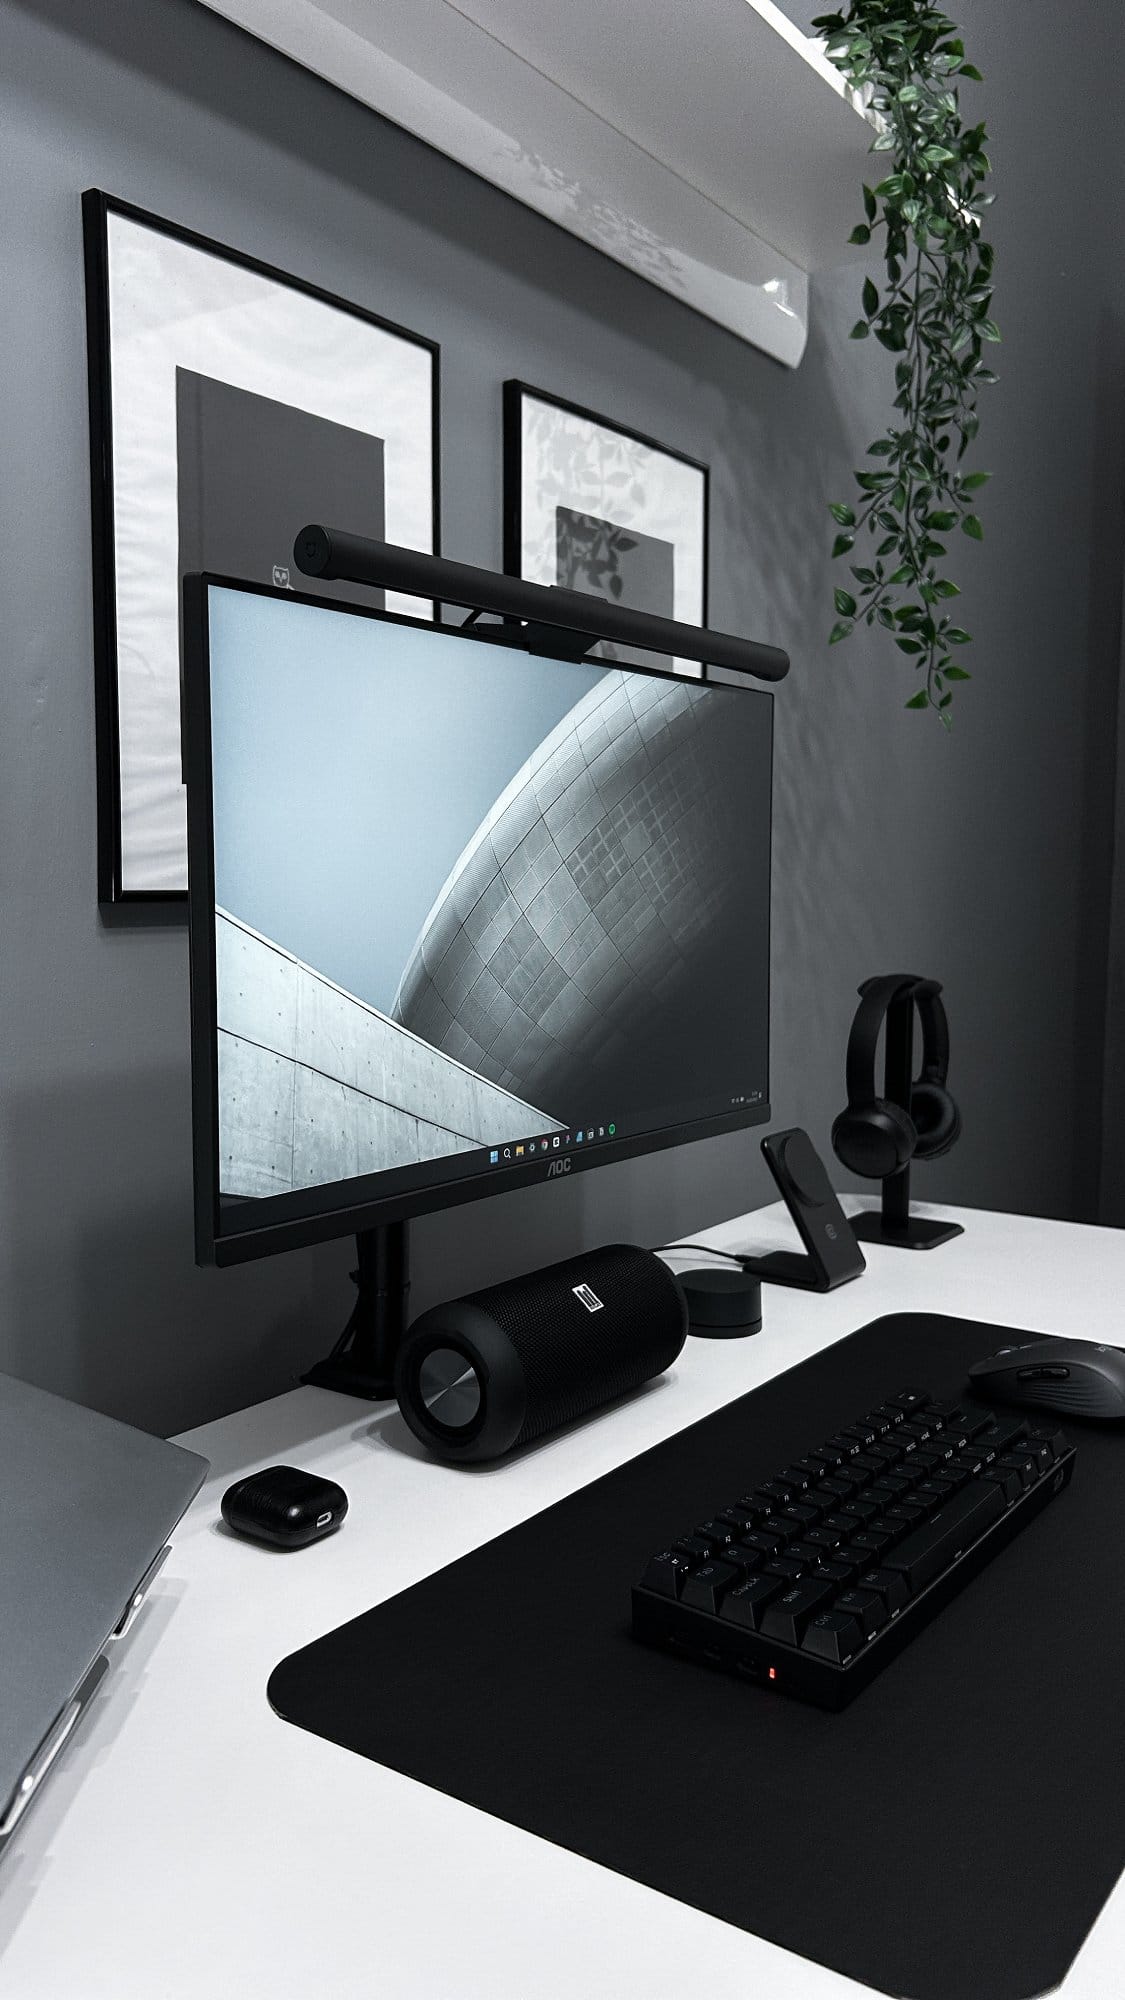 A modern and organised workspace with a large computer monitor, a mechanical keyboard, a cylindrical speaker, and headphones, accented by framed artwork and a hanging plant on a grey wall